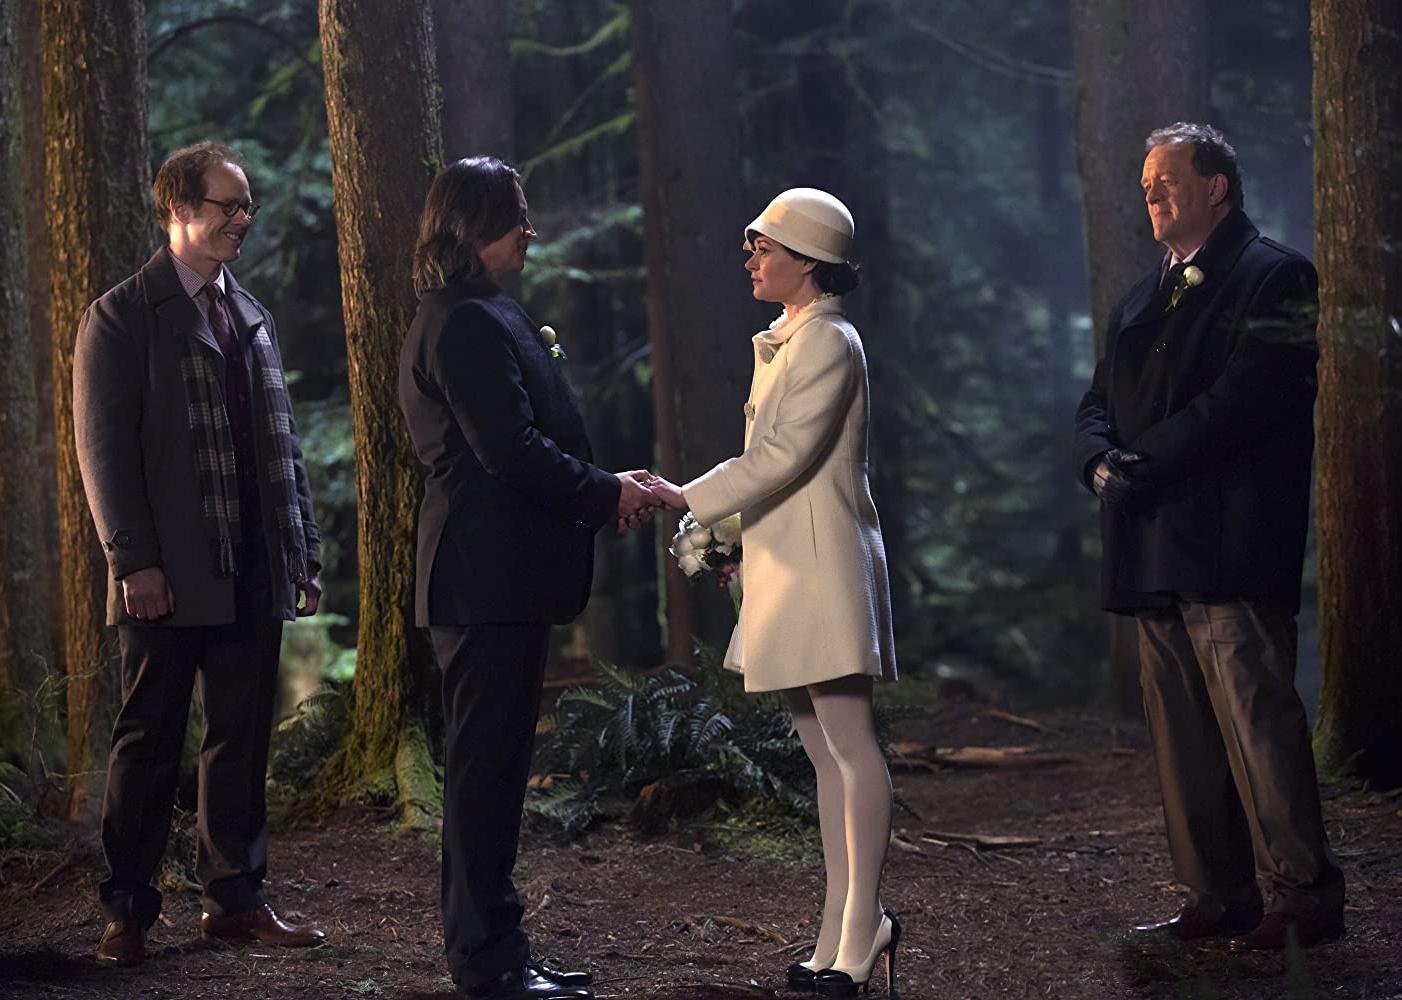 A man in a black suit and a woman in a white dress, coat and hat stand together in the woods holding hands with two others watching them.